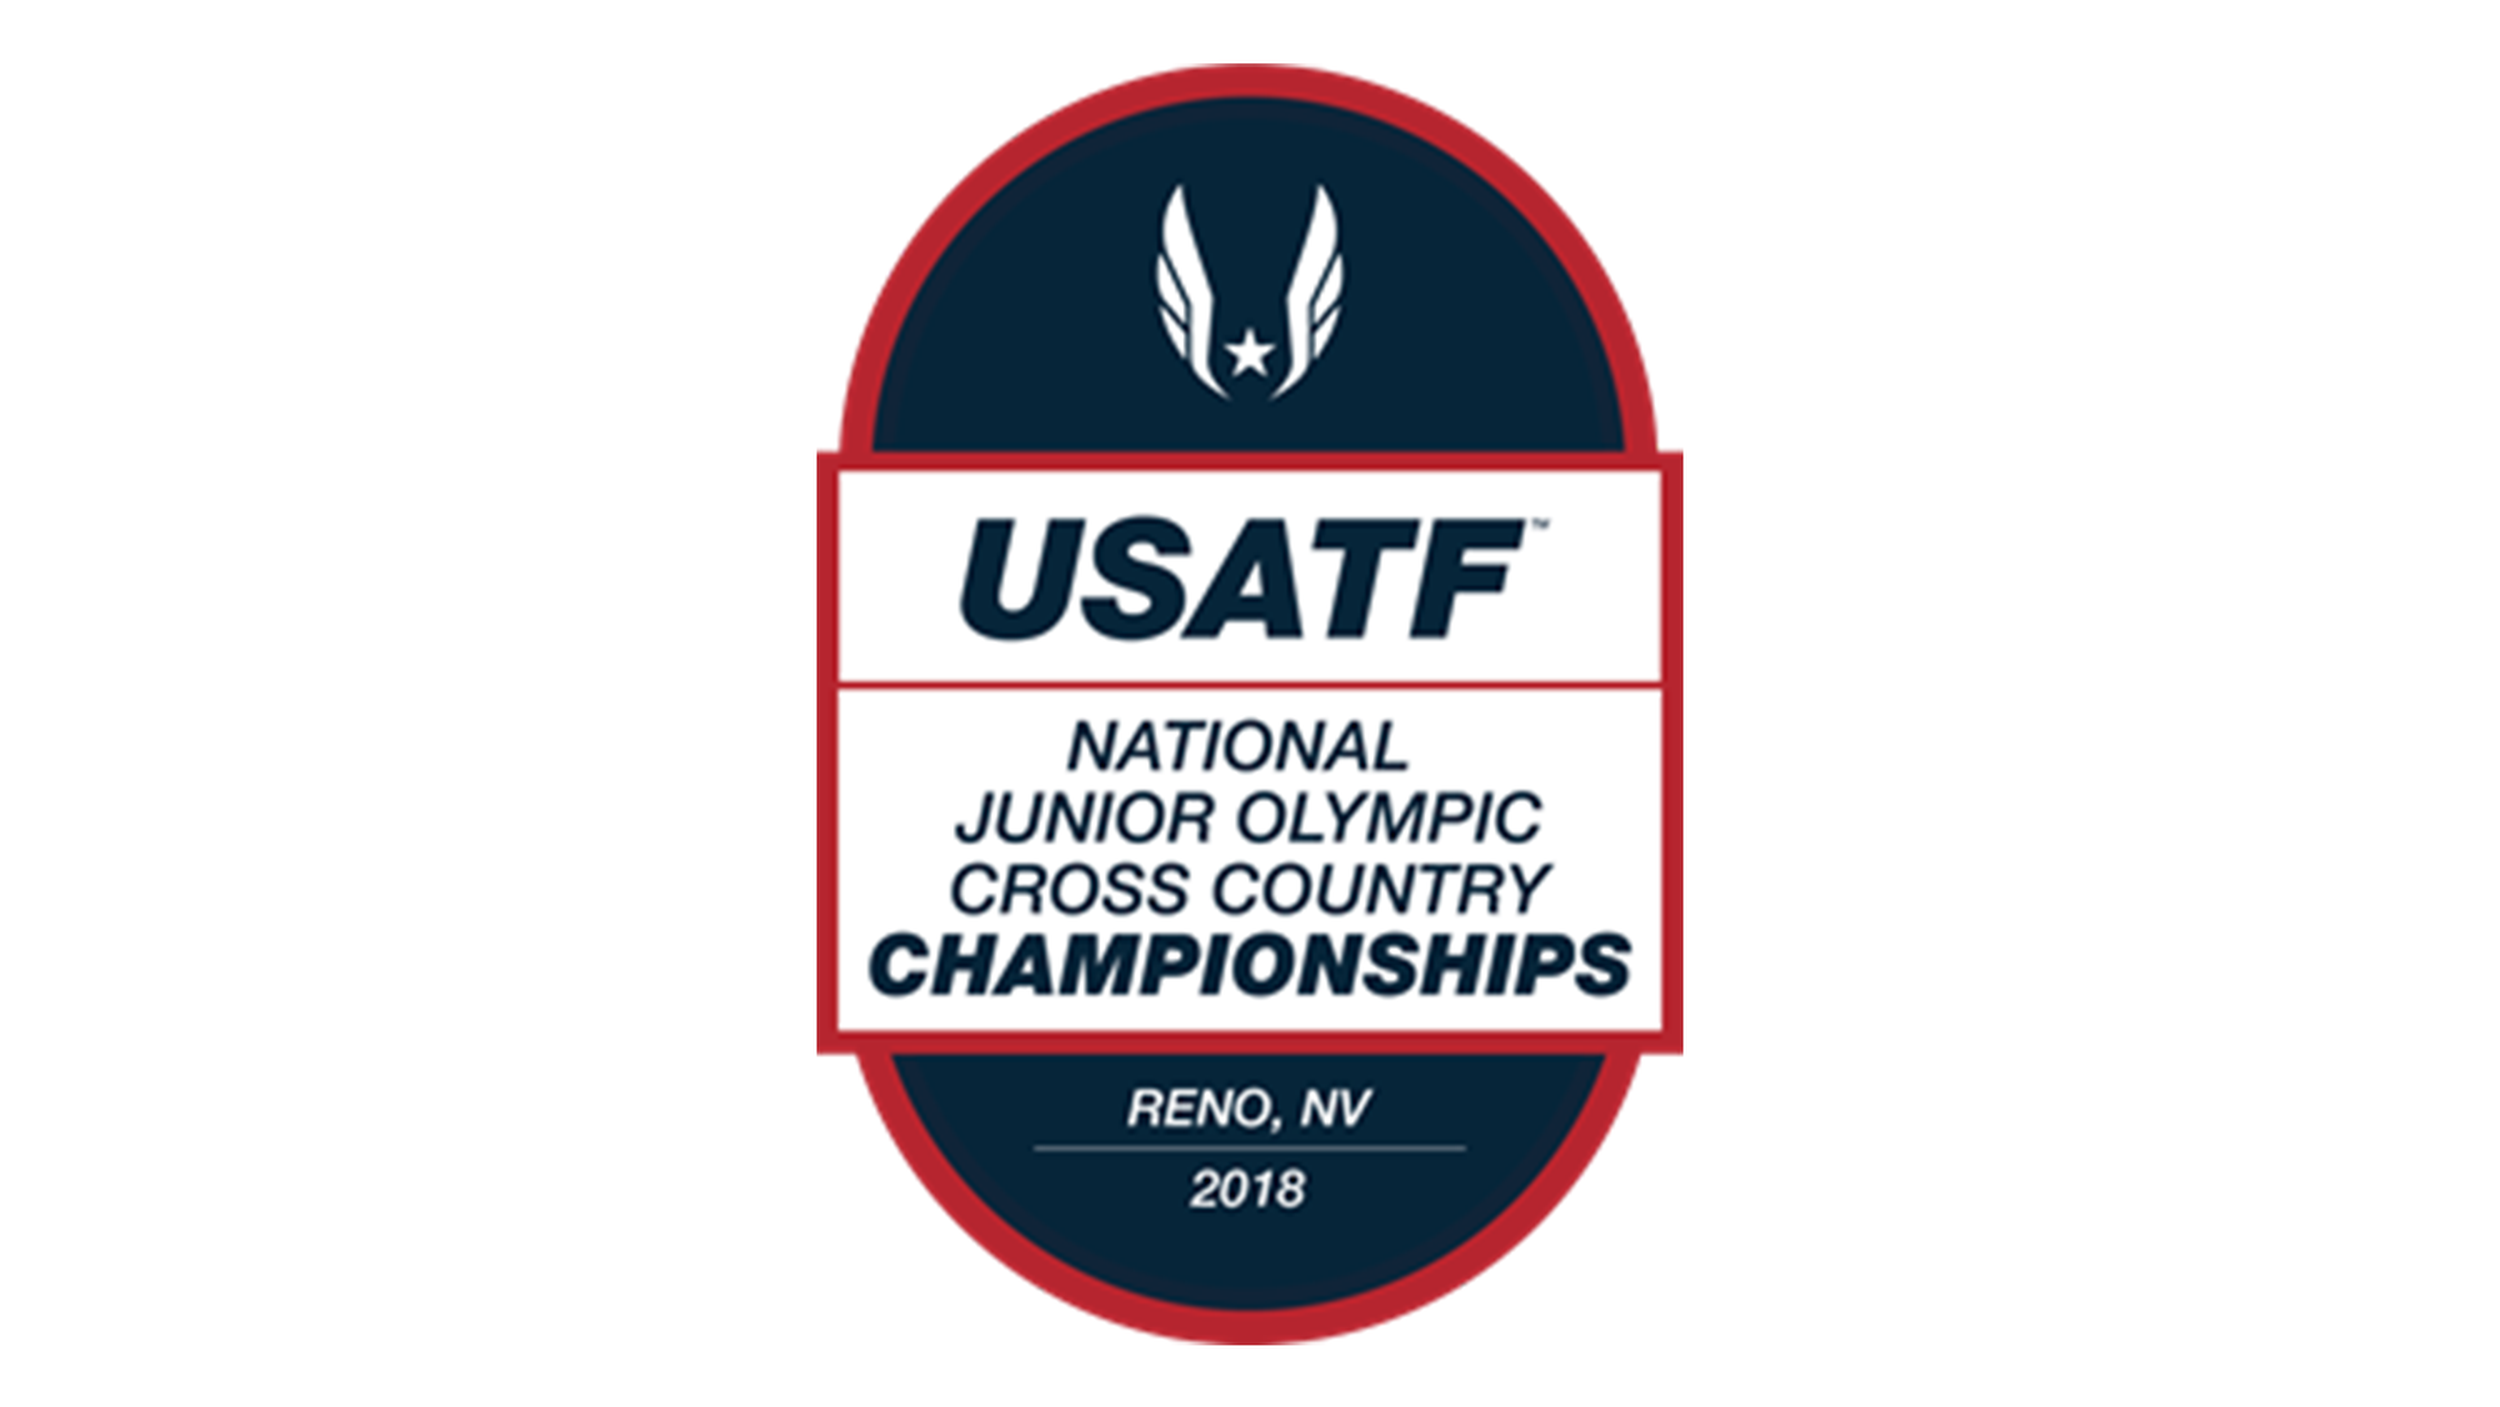 Locally Rowan Henry wins national title at USA Track and Field Junior